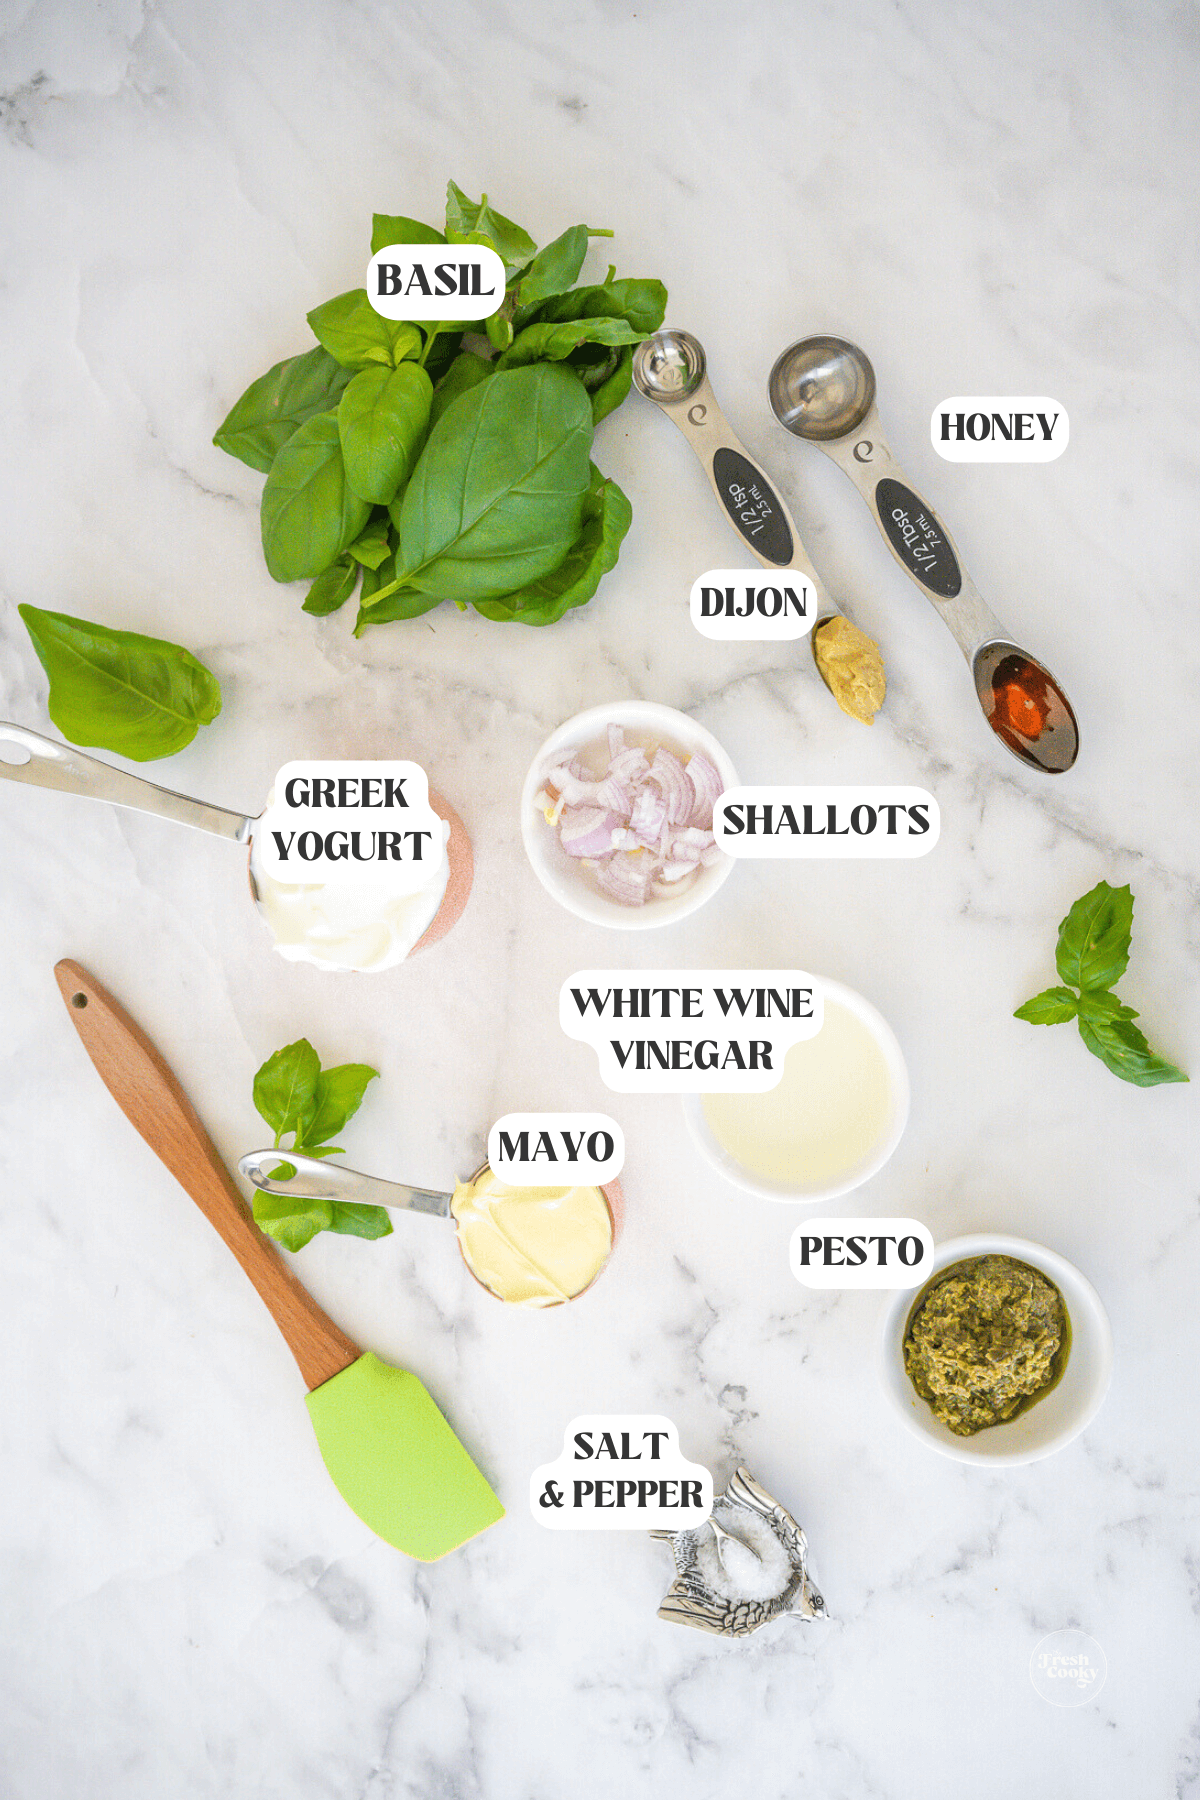 Labeled ingredients for green goddess salad dressing and dip.